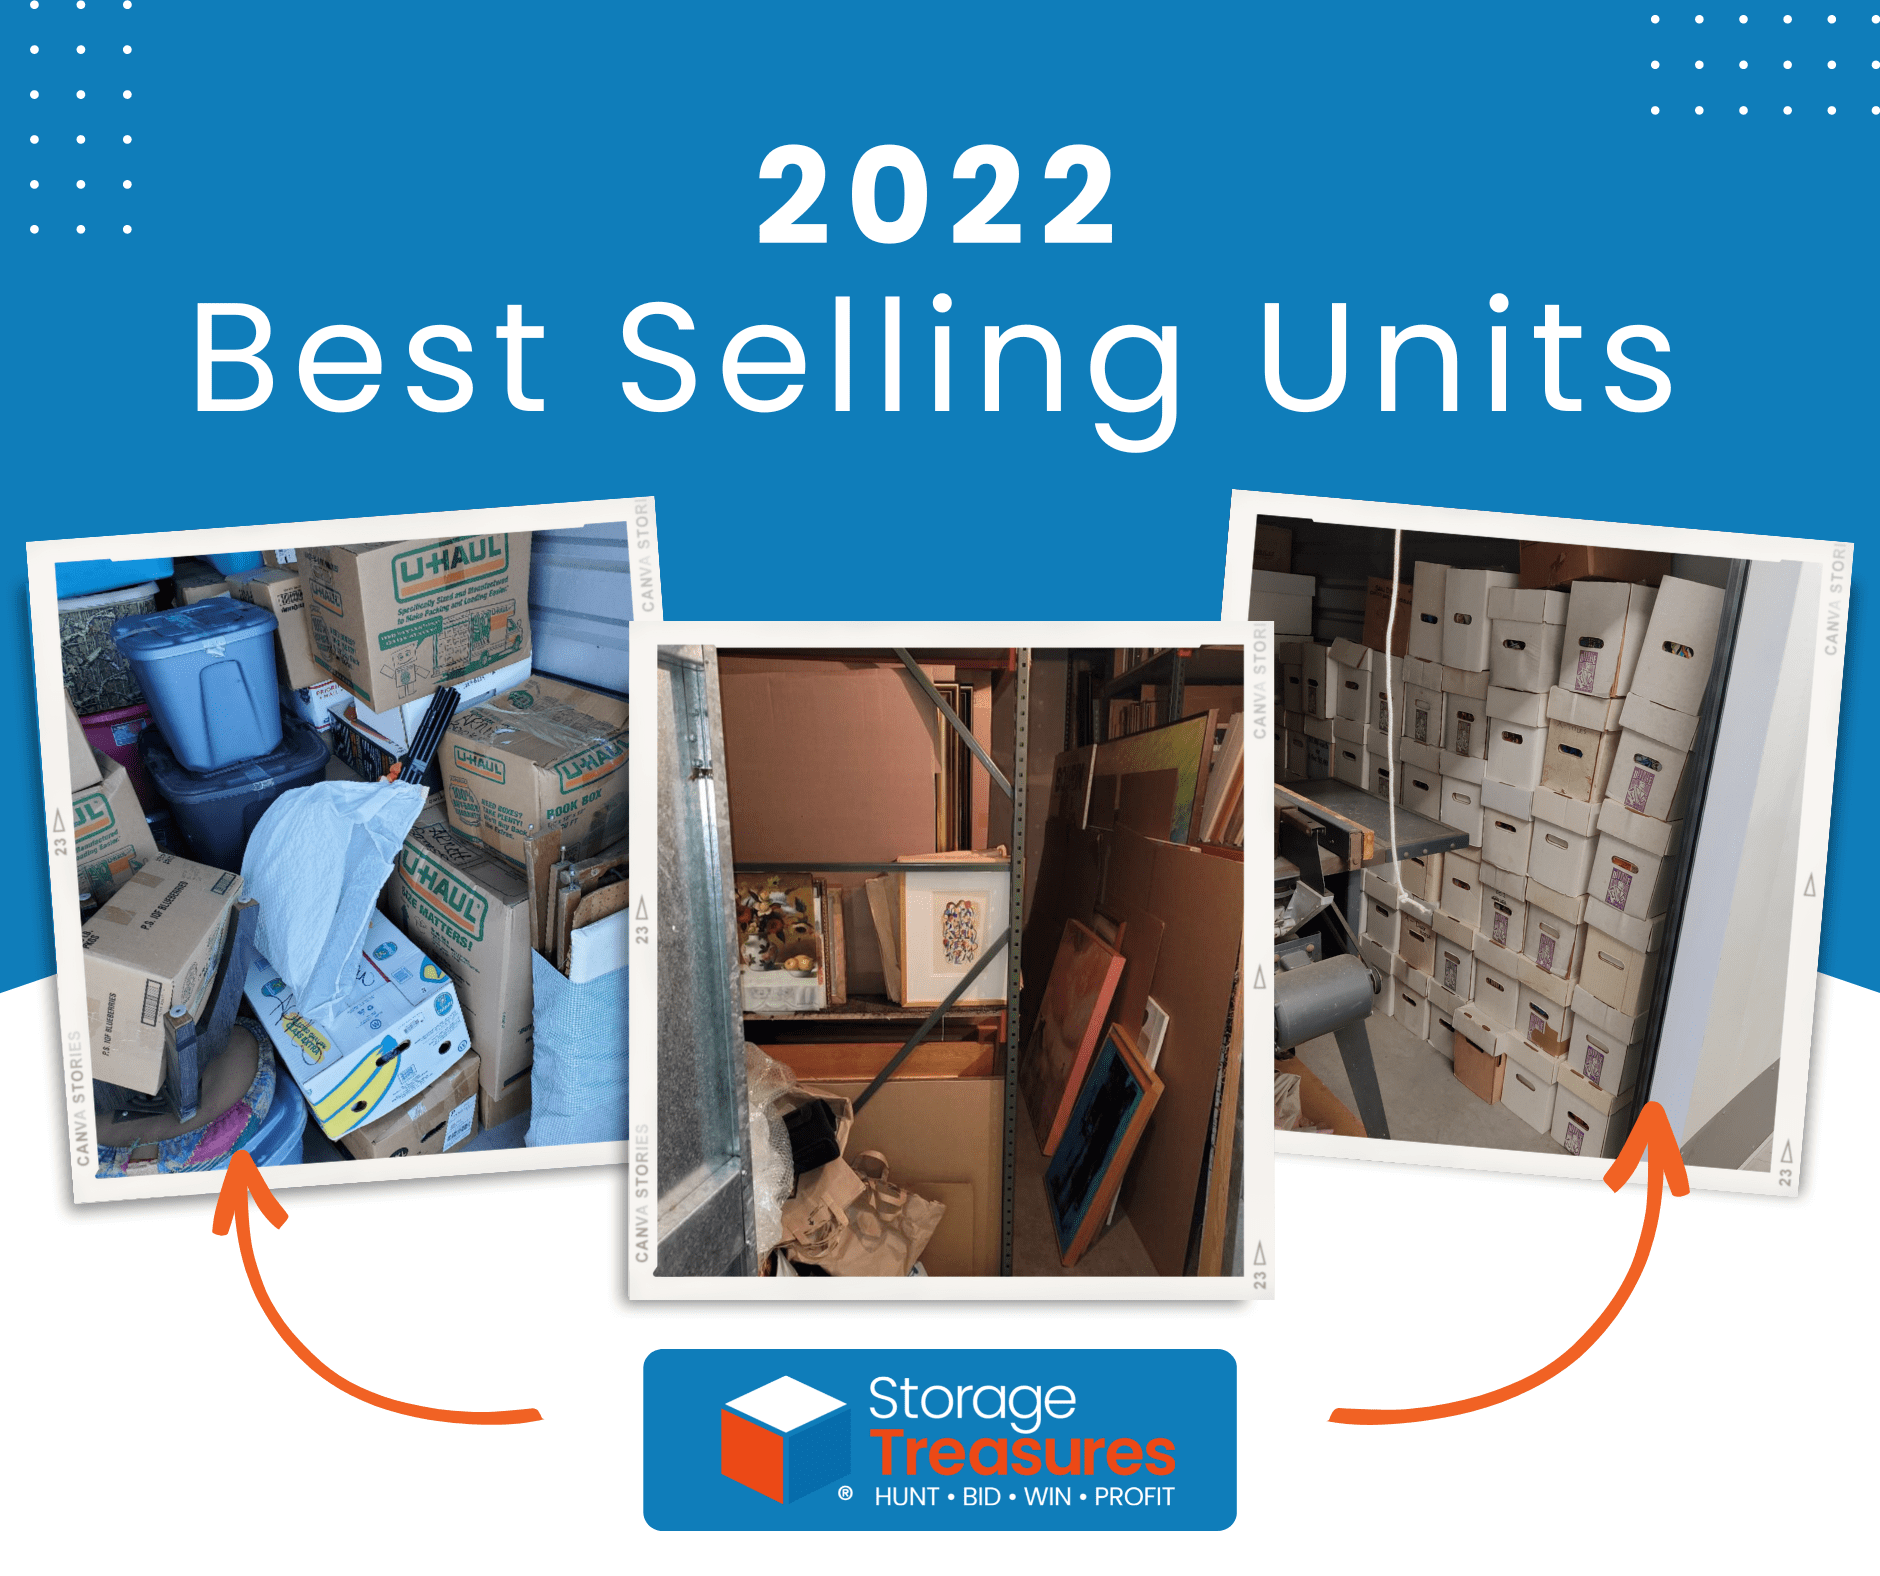 Our top selling storage auctions in 2022